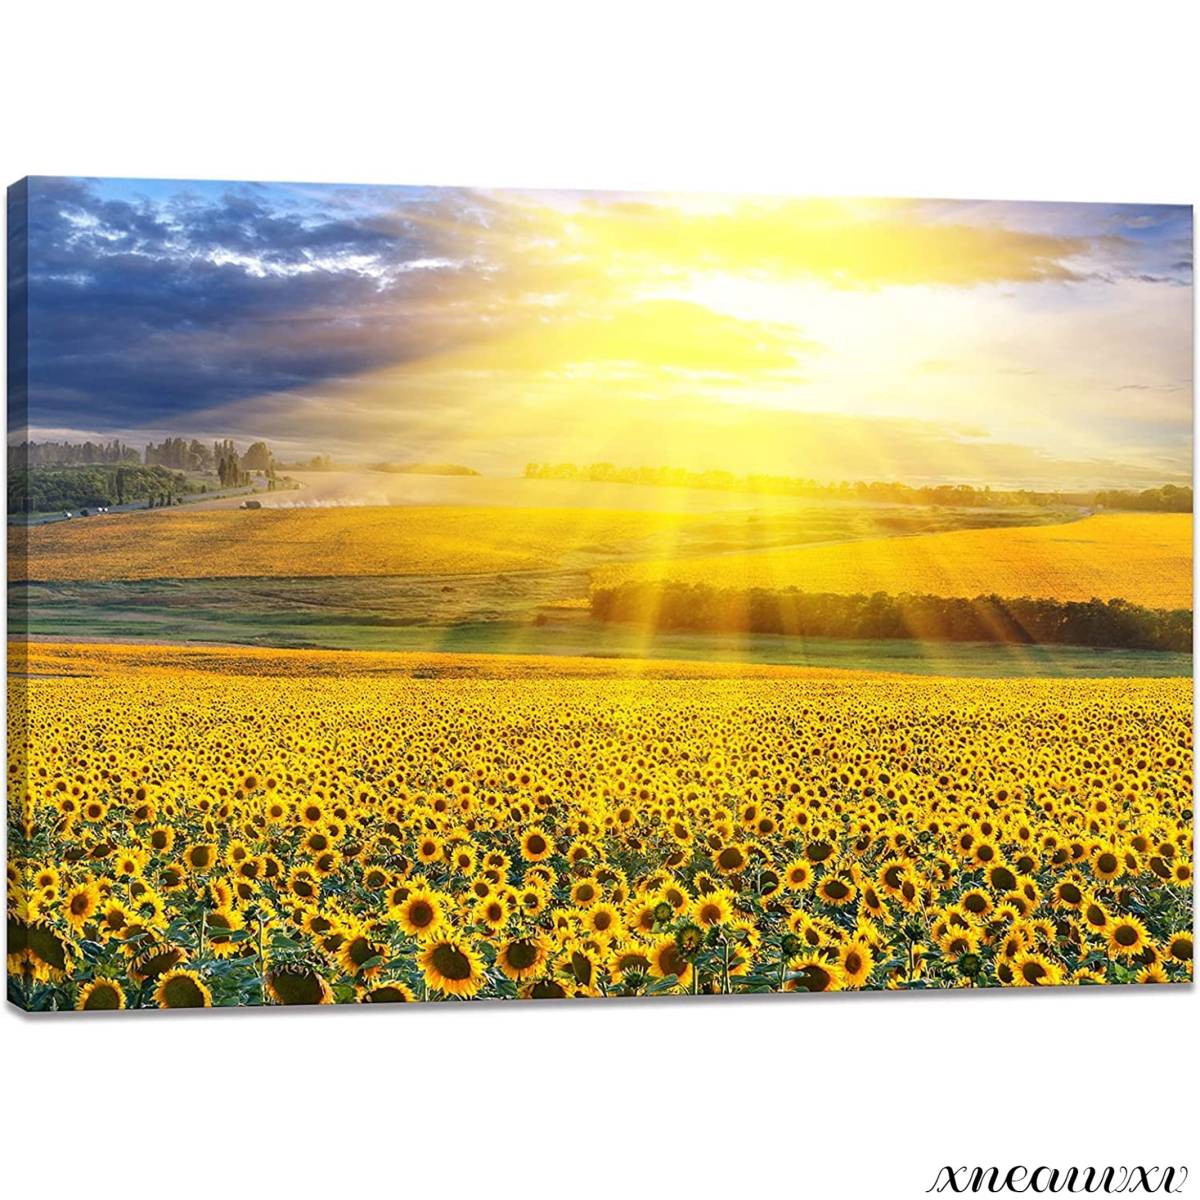 Sunflower field art panel nature sun spectacular view interior scenery wall hanging room decoration canvas painting fashion good luck overseas art appreciation redecoration, artwork, painting, graphic